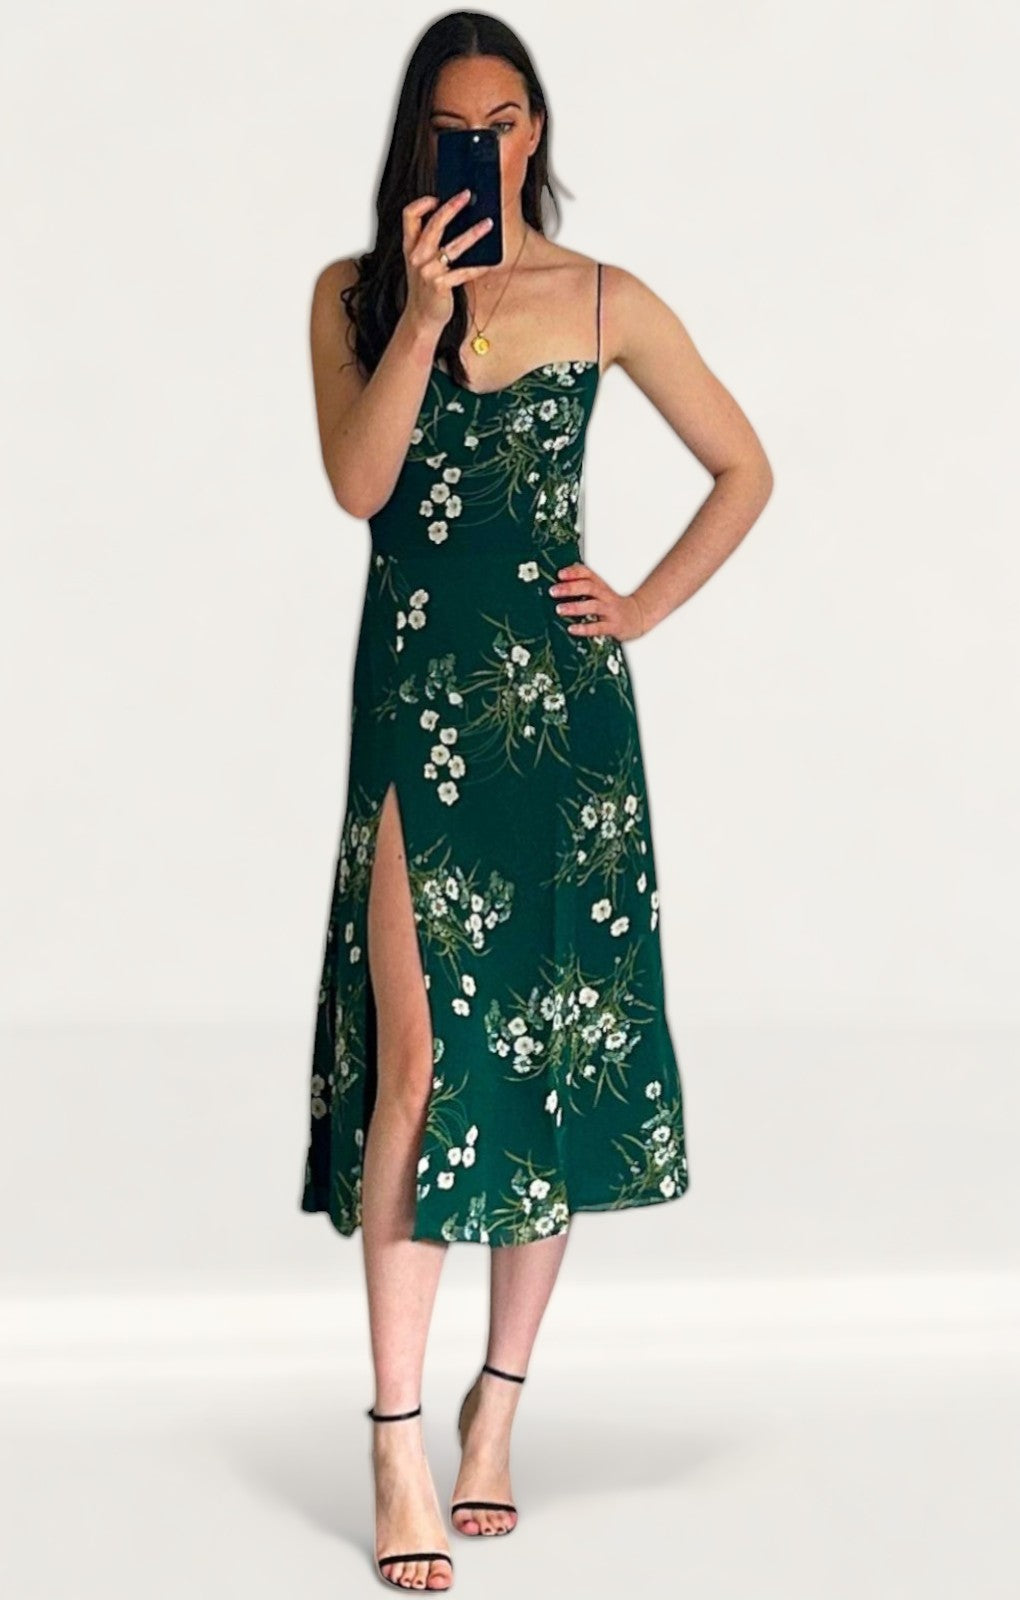 Reformation Juliette Buena Midi Dress in Emerald Floral Print product image